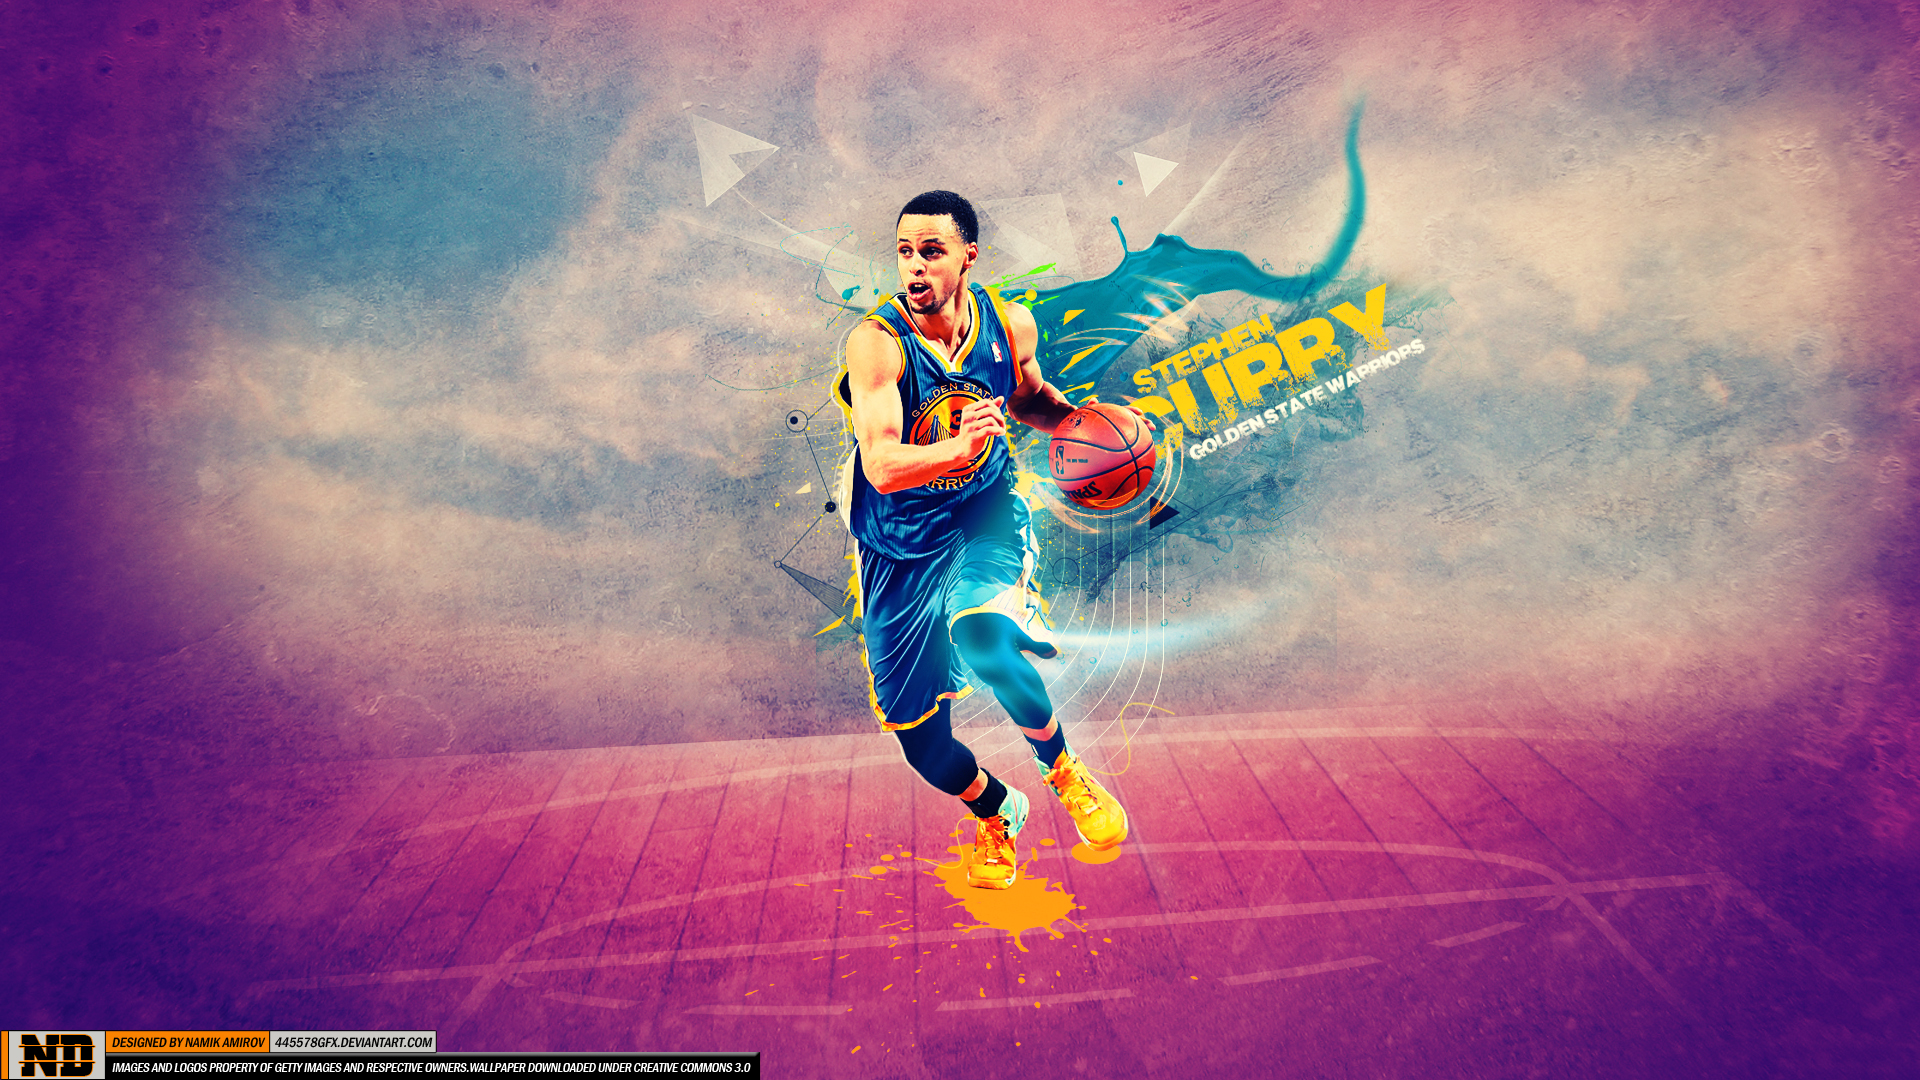 Stephen Curry Golden State Warriors background cute Backgrounds